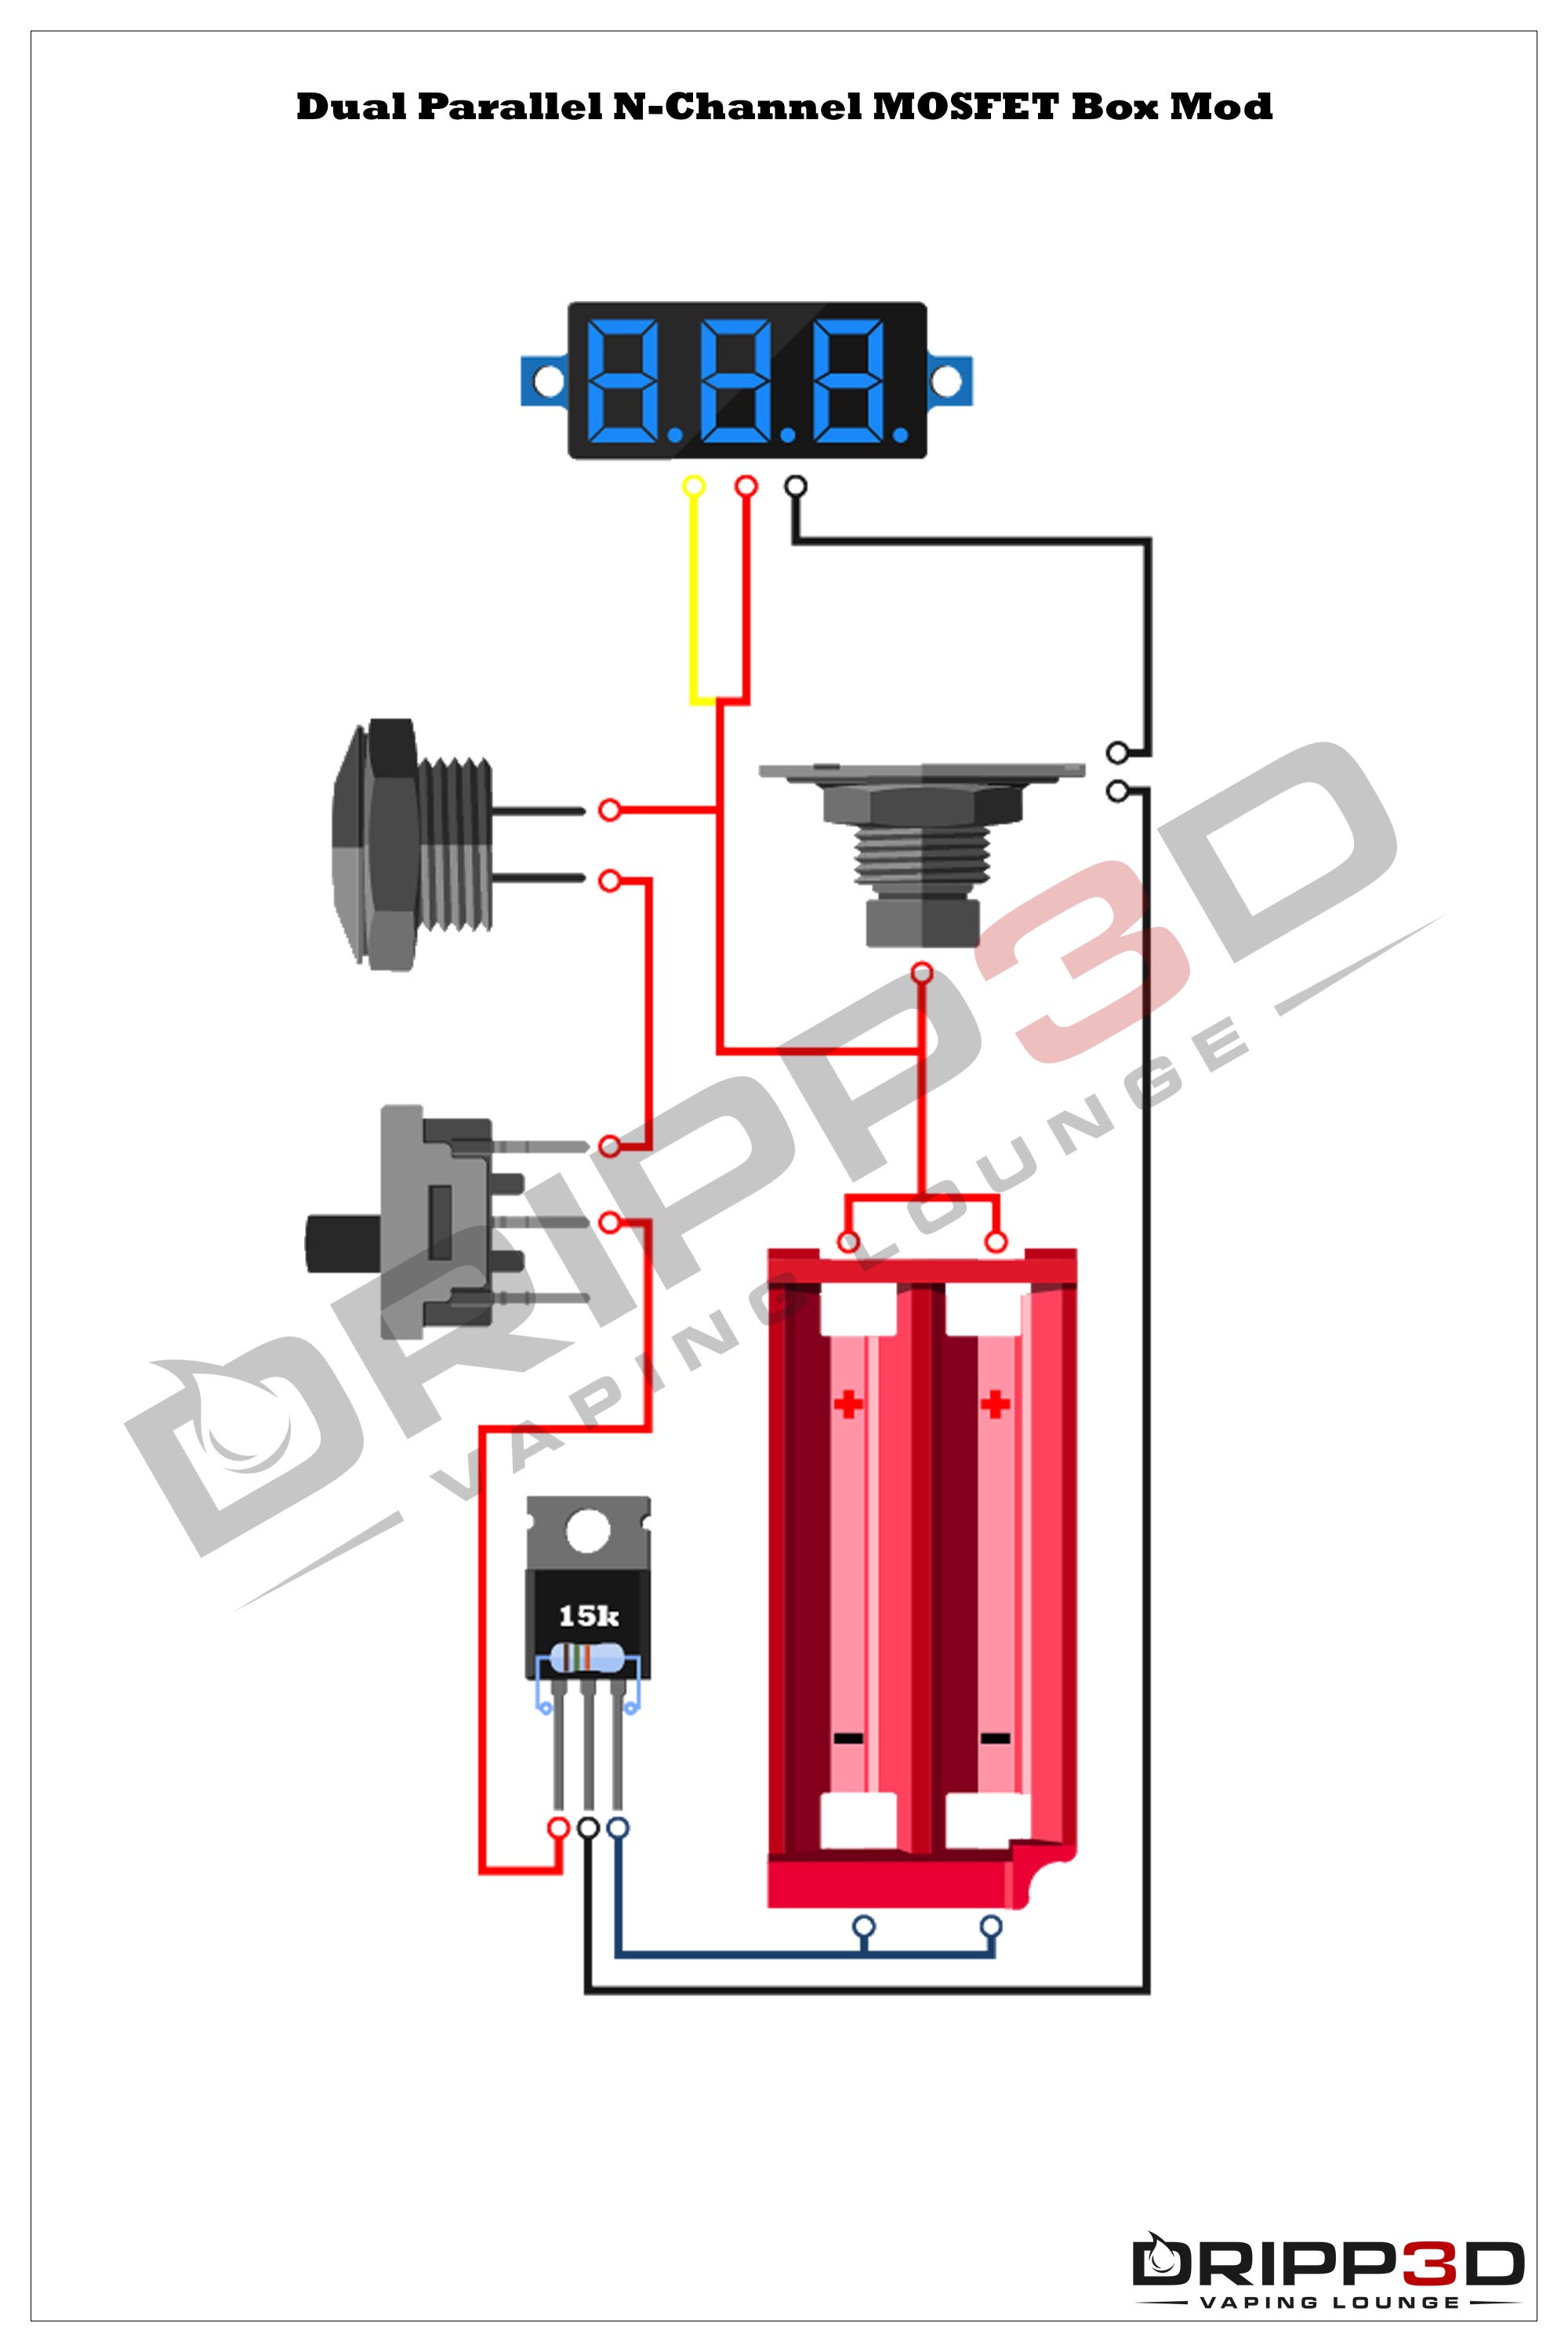 Wiring Diagrams Magnificent Unregulated Series Box Mod Diagram